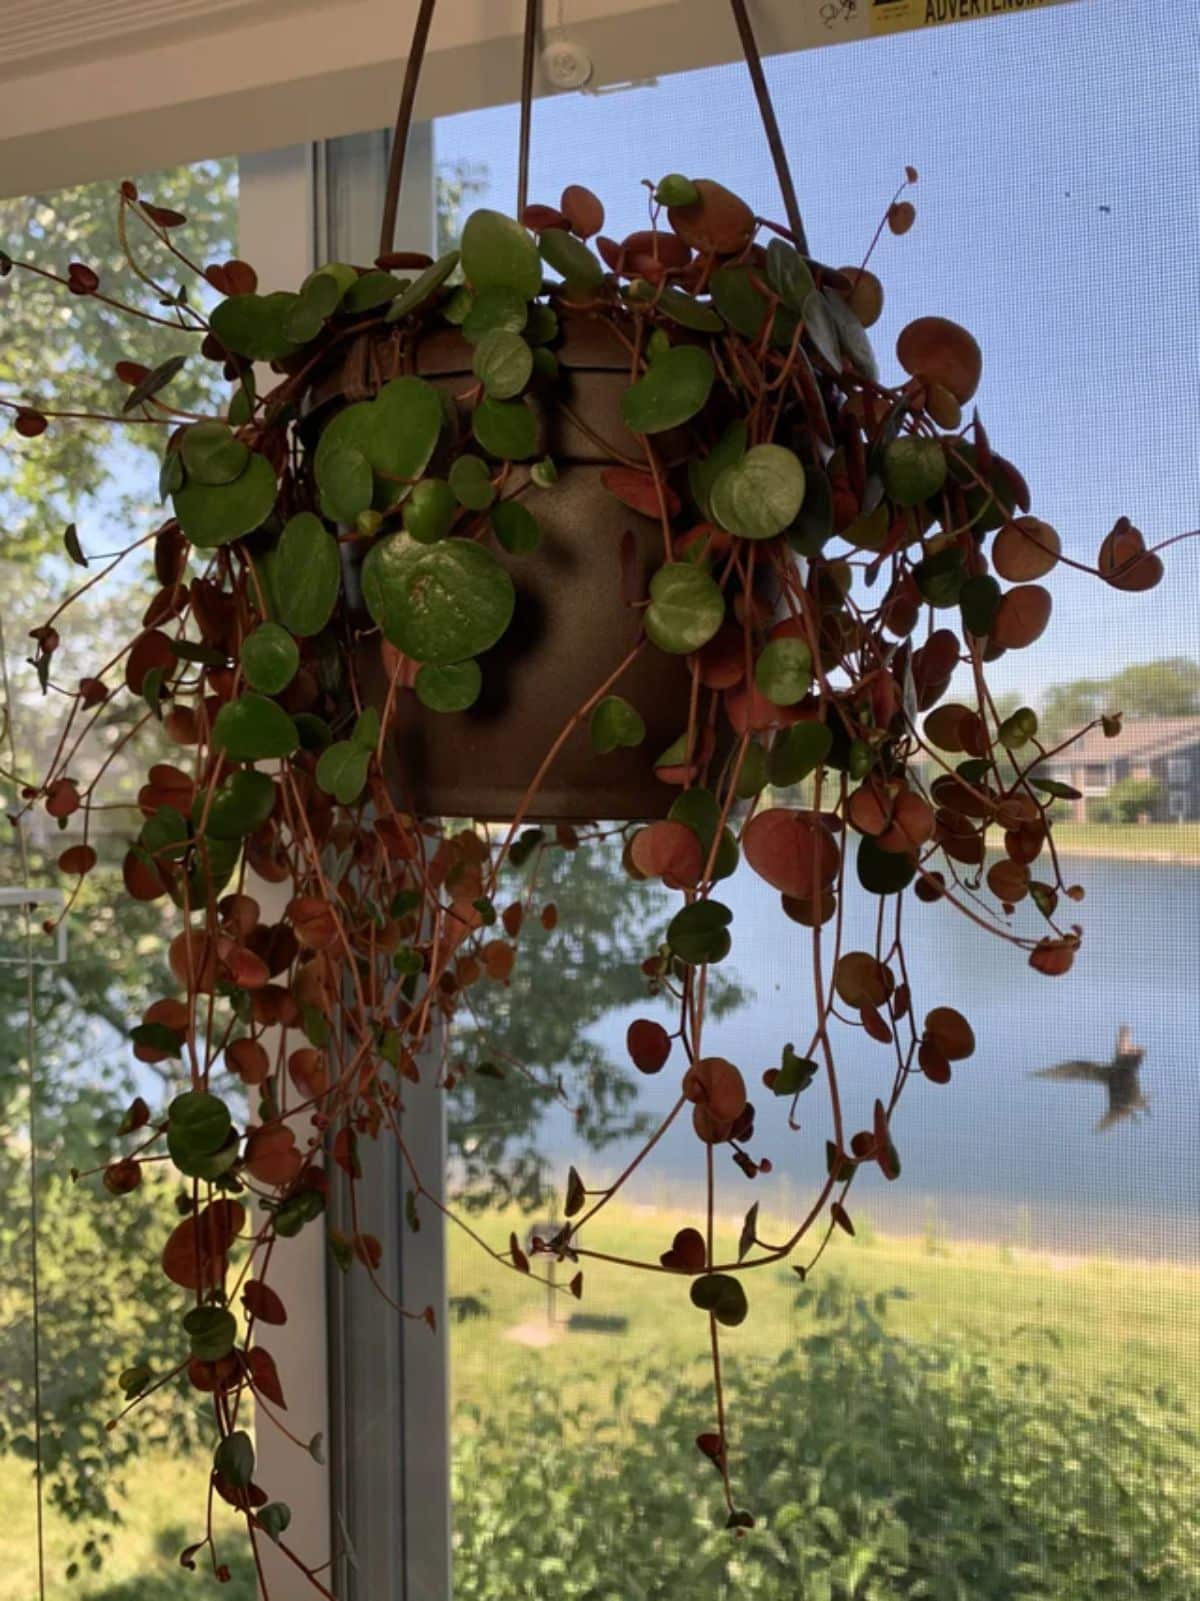 A Peperomia Ruby cascade in a hanging pot near a window.